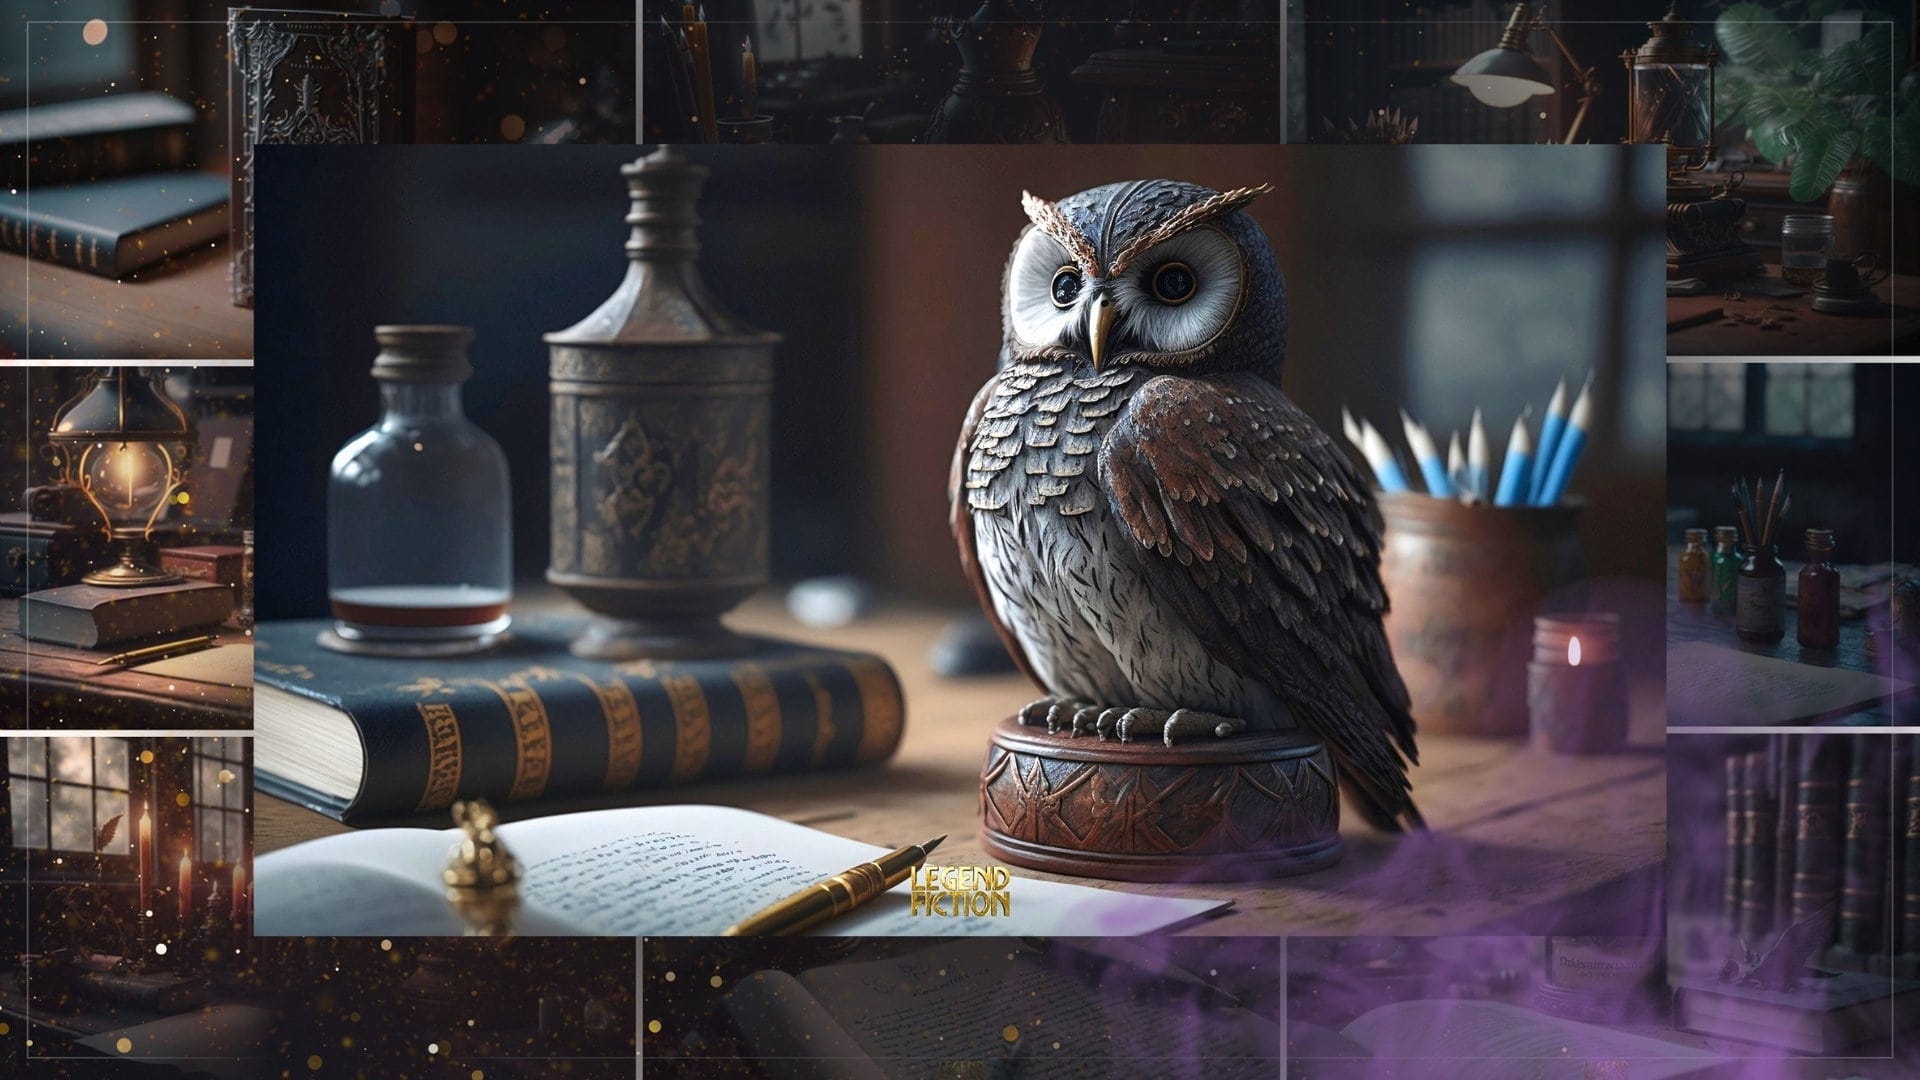 Wizarding Desks & Books – Free wallpapers for your screens, stories, & inspiration!